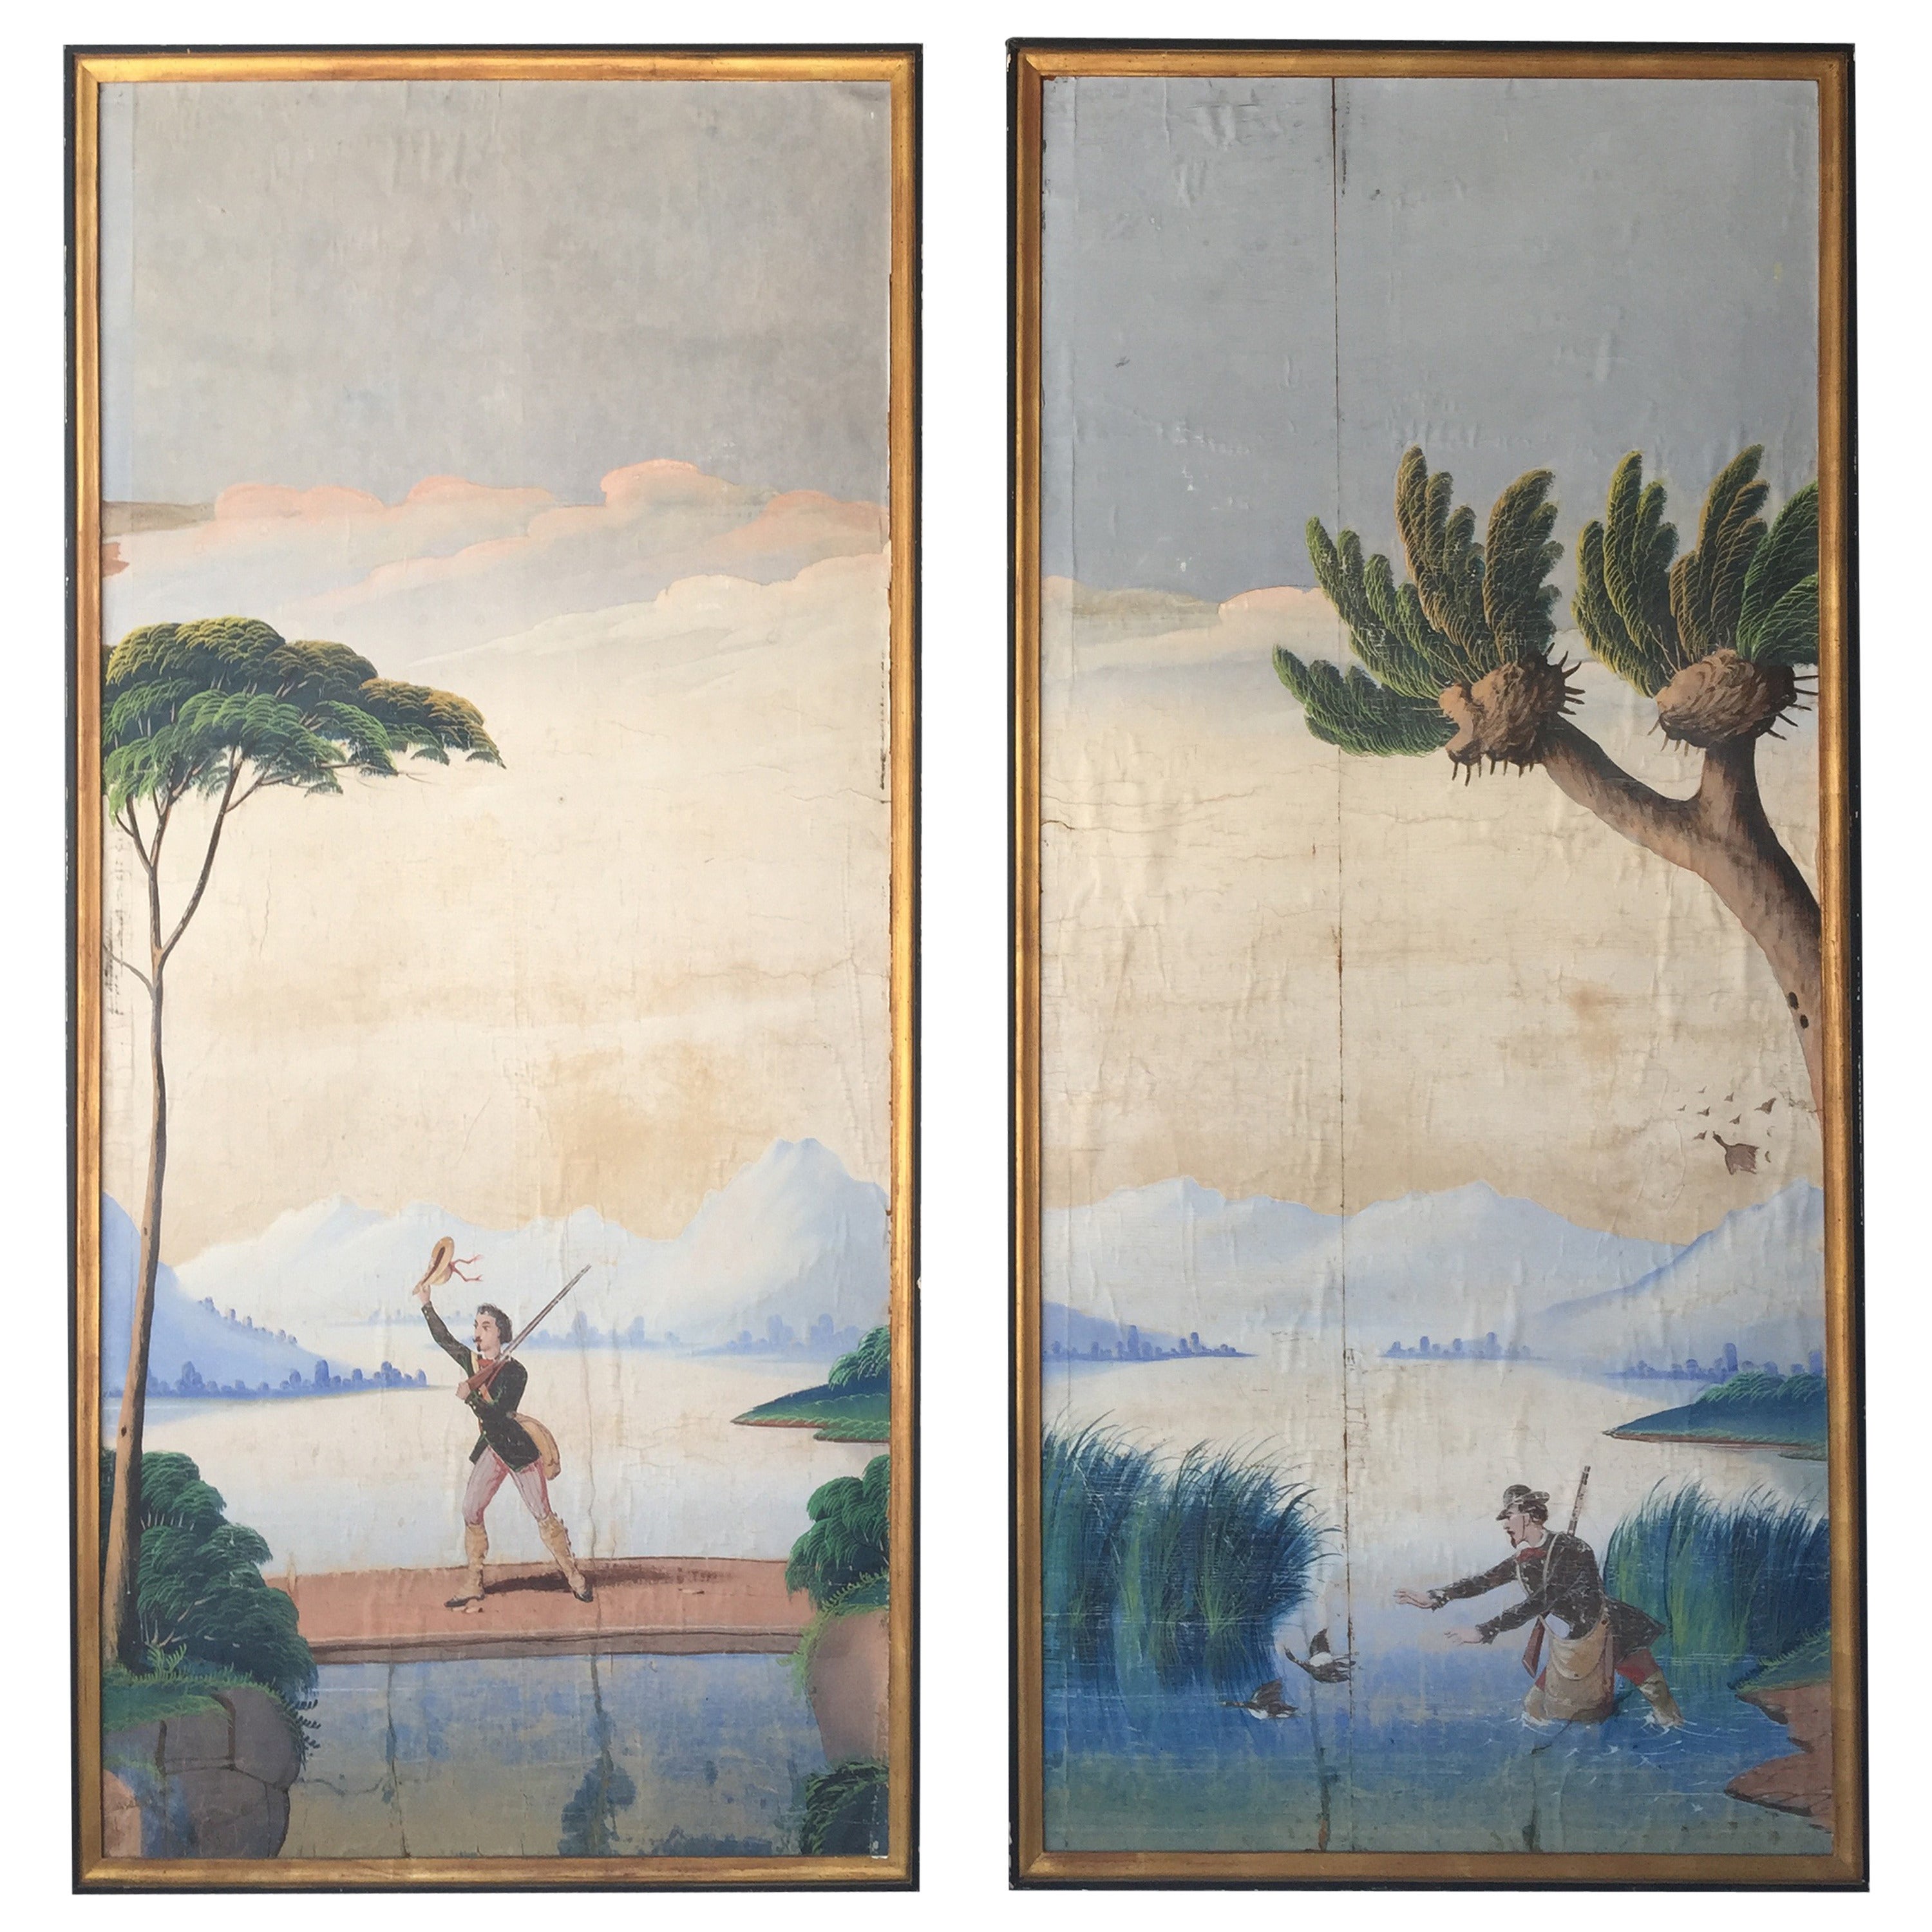 Pair of 1830s Hand-Painted Italian or French Scenic Wallpaper Panels